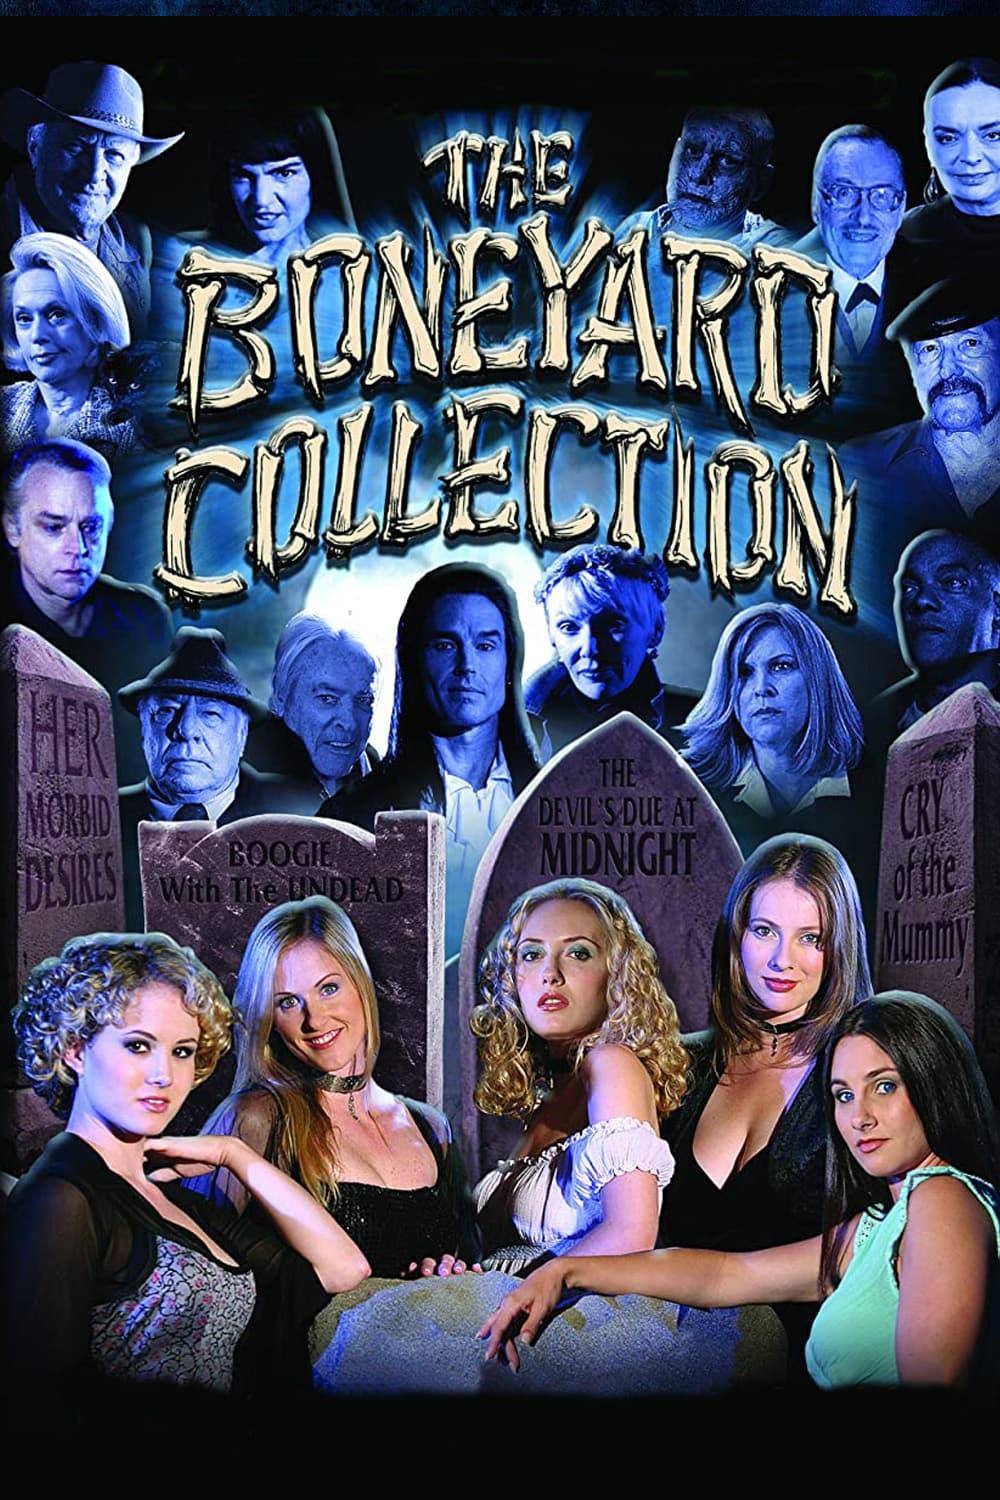 The Boneyard Collection poster